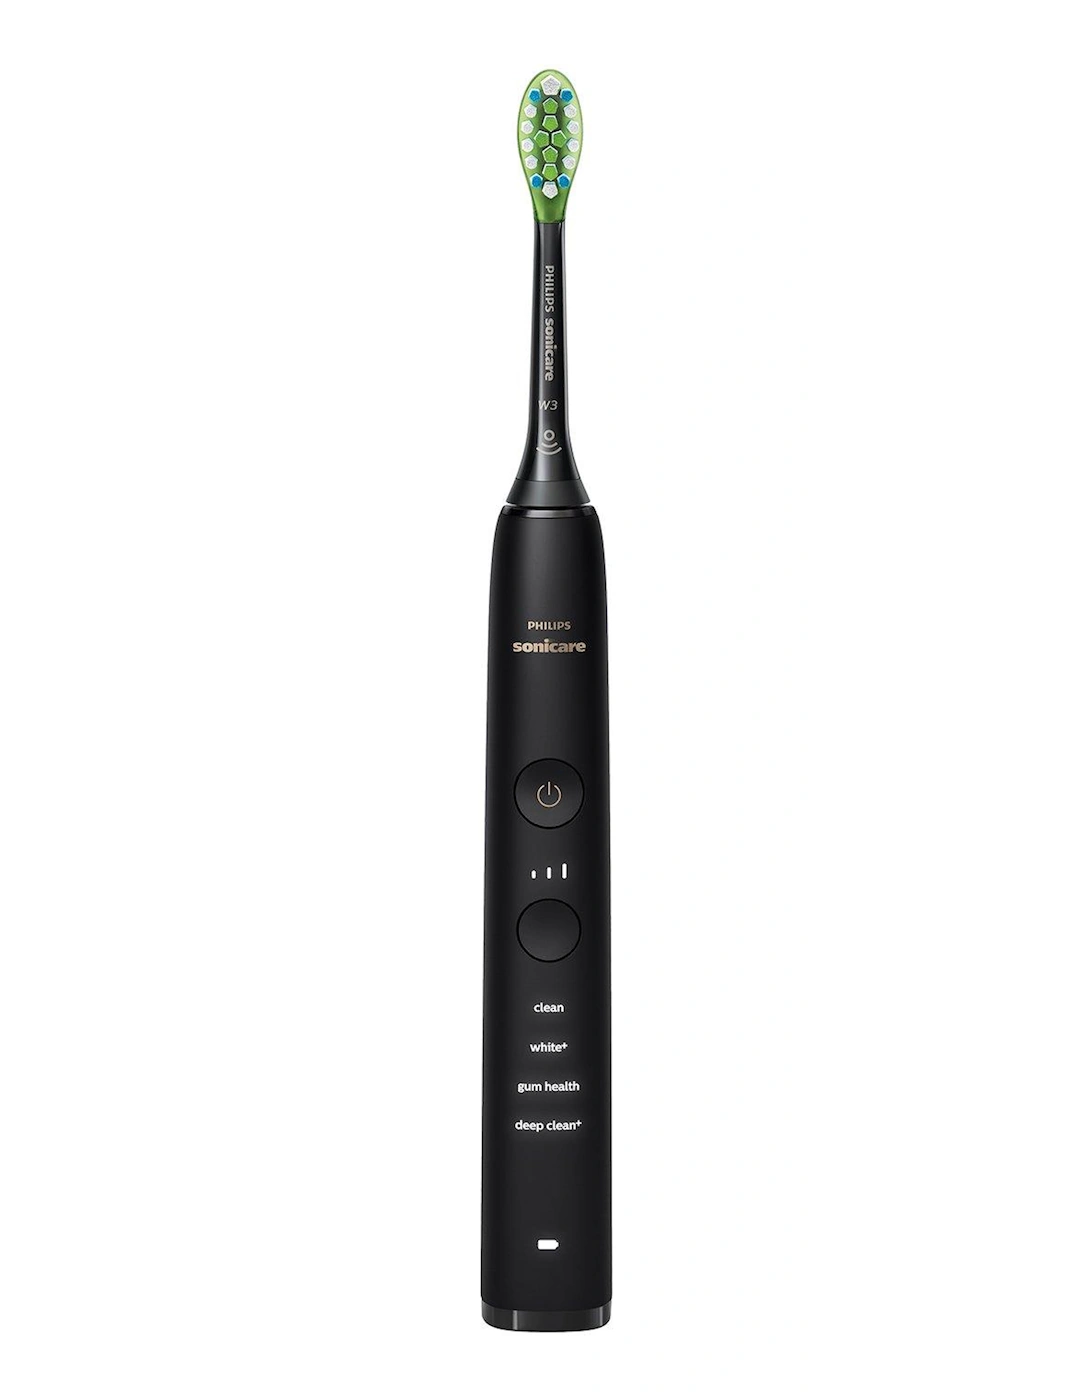 Sonicare DiamondClean 9000 Electric Toothbrush with App, HX9911/39 - Black